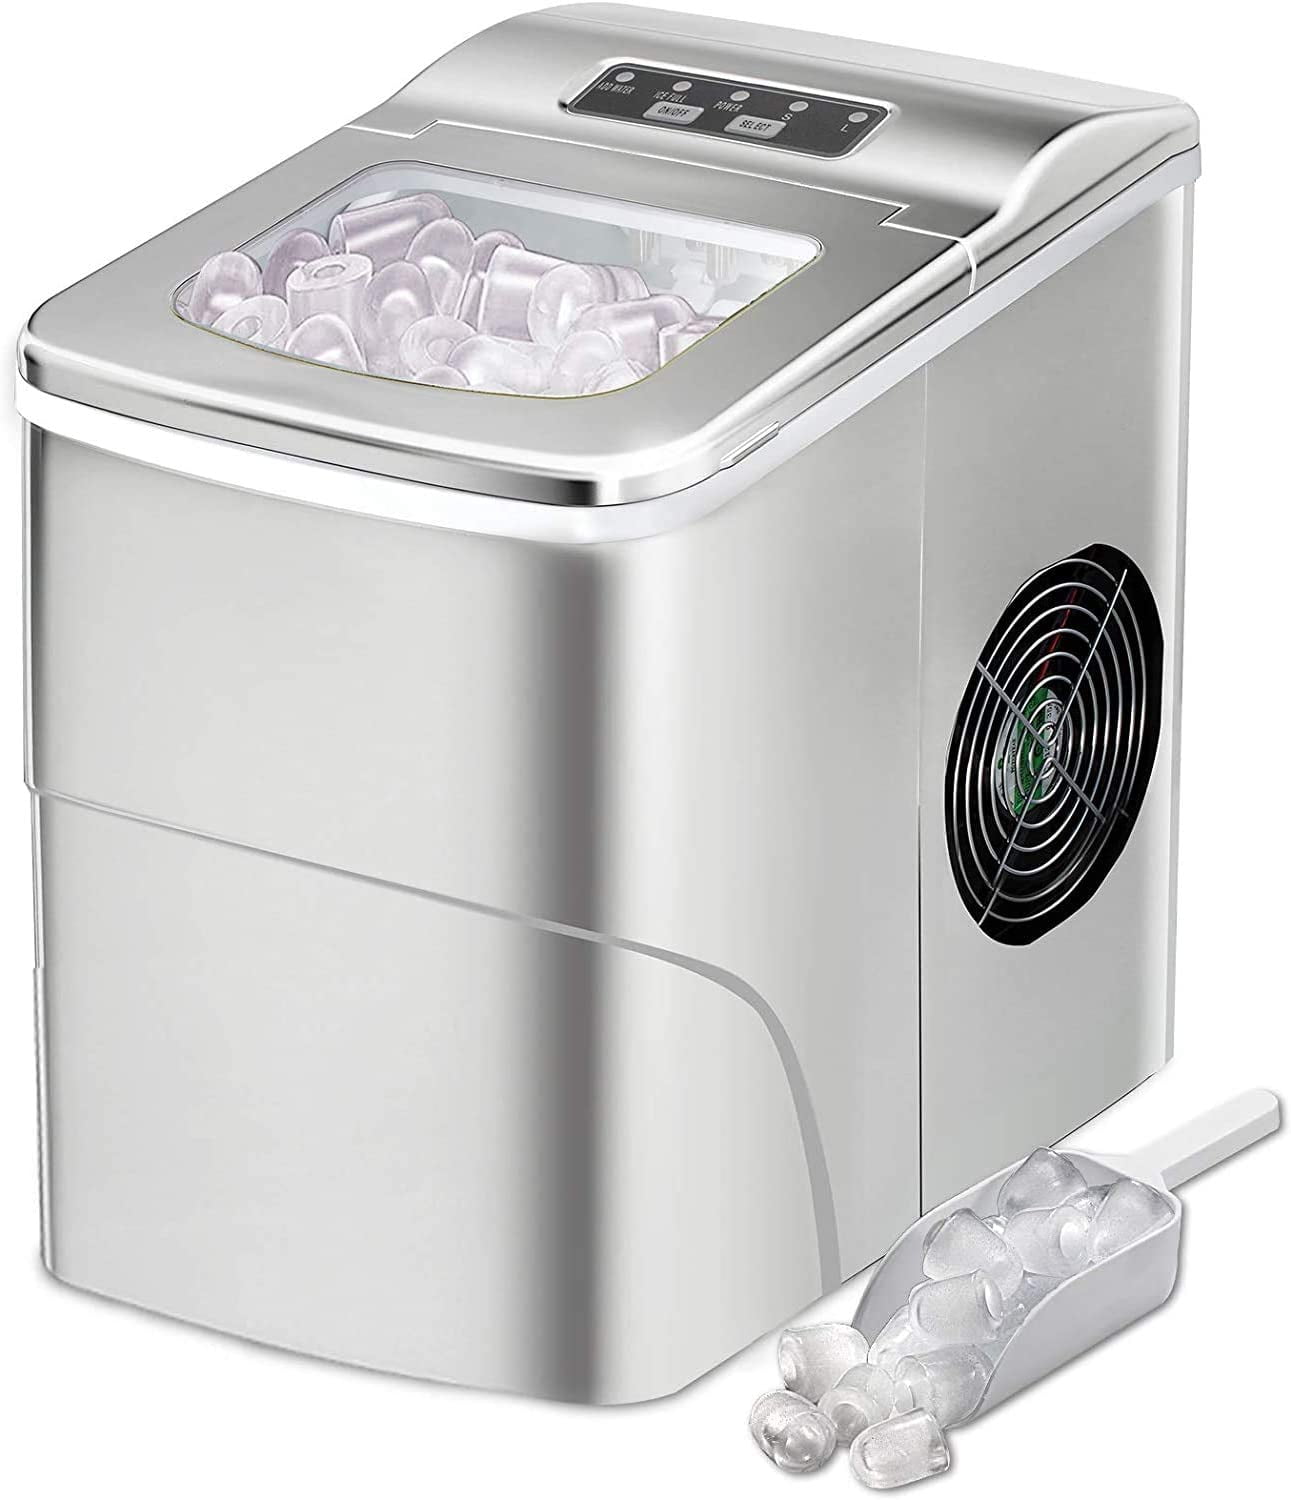 AGLUCKY Counter top Ice Maker Machine,Compact Automatic Ice Maker,9 Cubes  Ready in 6-8 Minutes,Portable Ice Cube Maker with Scoop and Basket,Perfect  For Home/Kitchen/Office/Bar (Silver) 